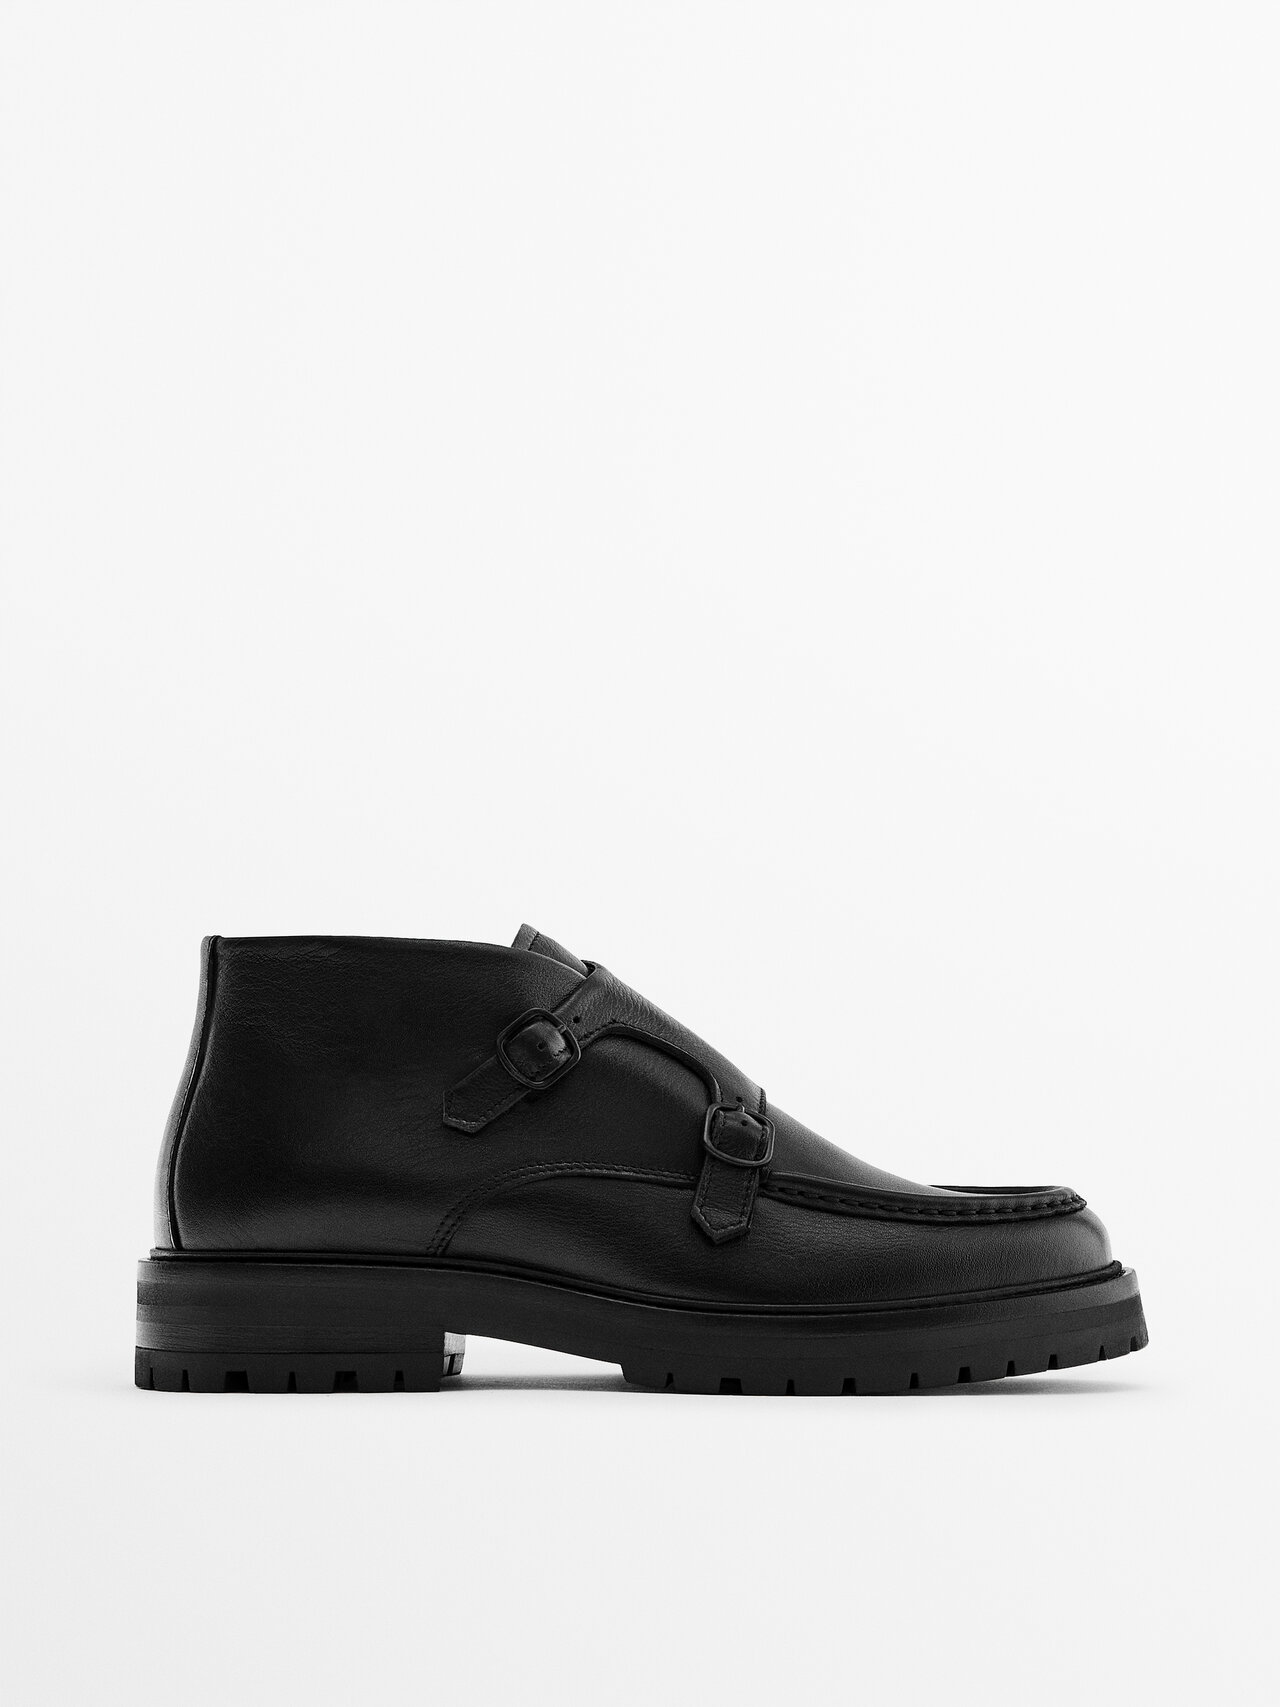 Massimo Dutti Nappa Leather Monk Ankle Boots In Black